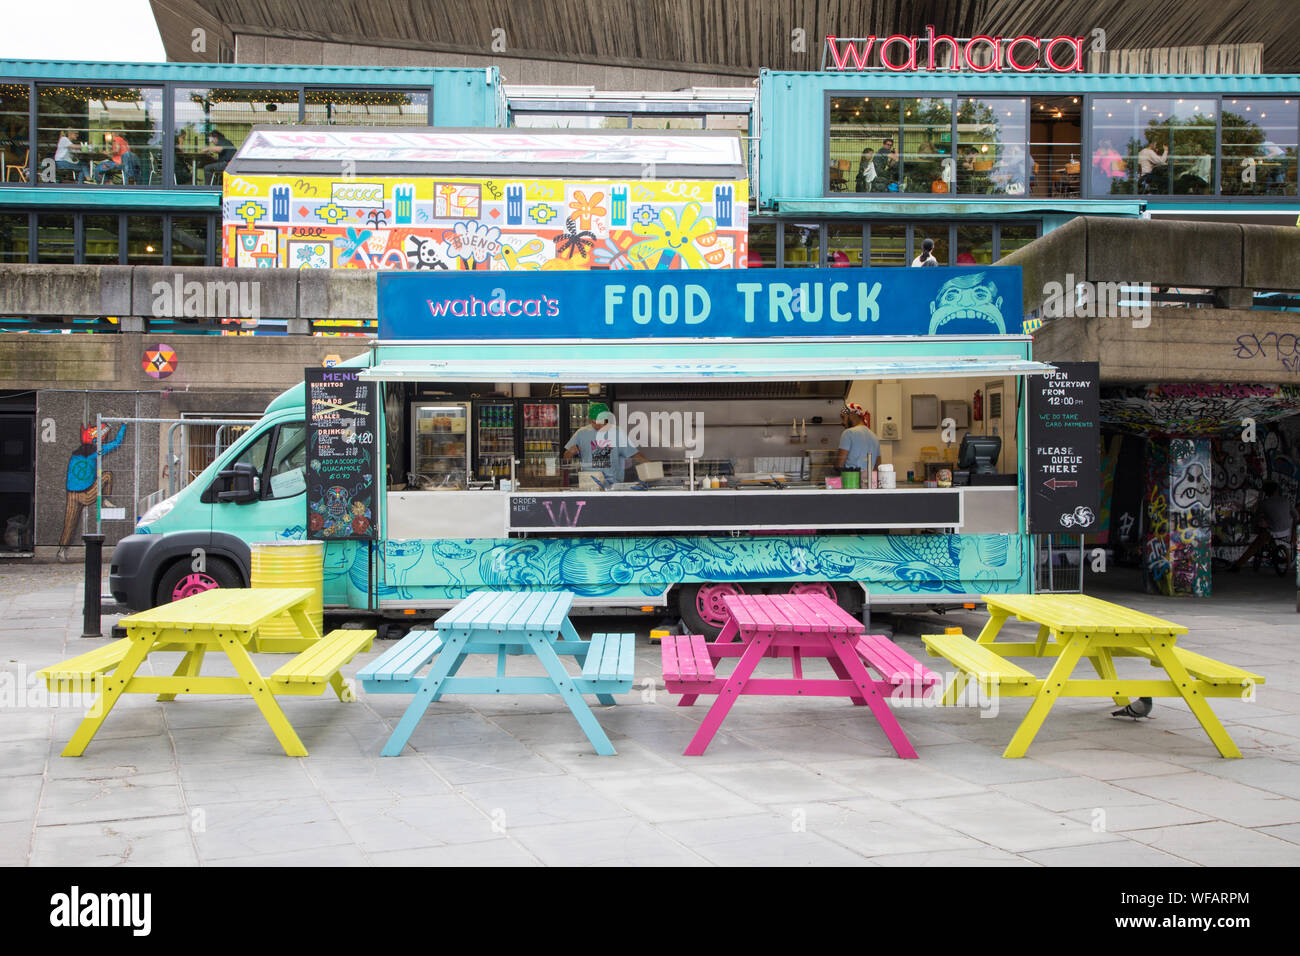 London, UK - 5 June 2017: Colourful food wagon on the Southbank. This is a popular arts area of galleries, theatres, bars and restaurants on the south Stock Photo